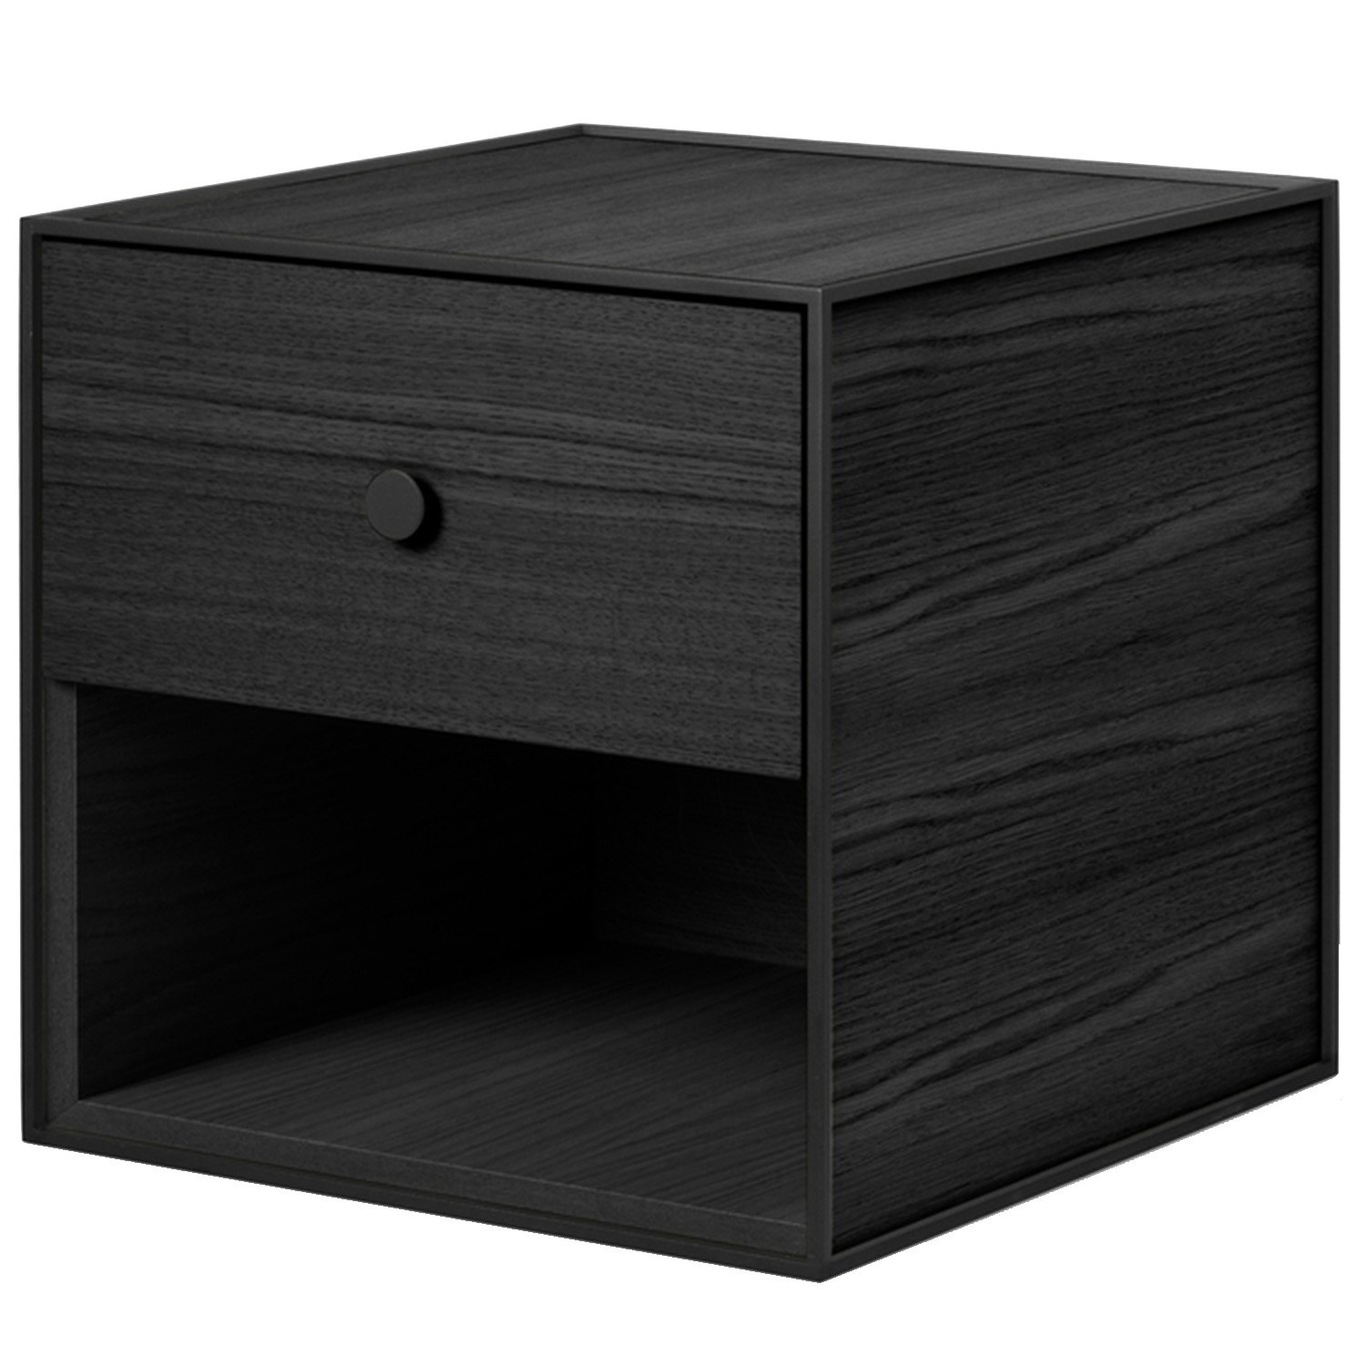 Frame 35 Bedside Table With 1 Drawer, Black Stained Ash